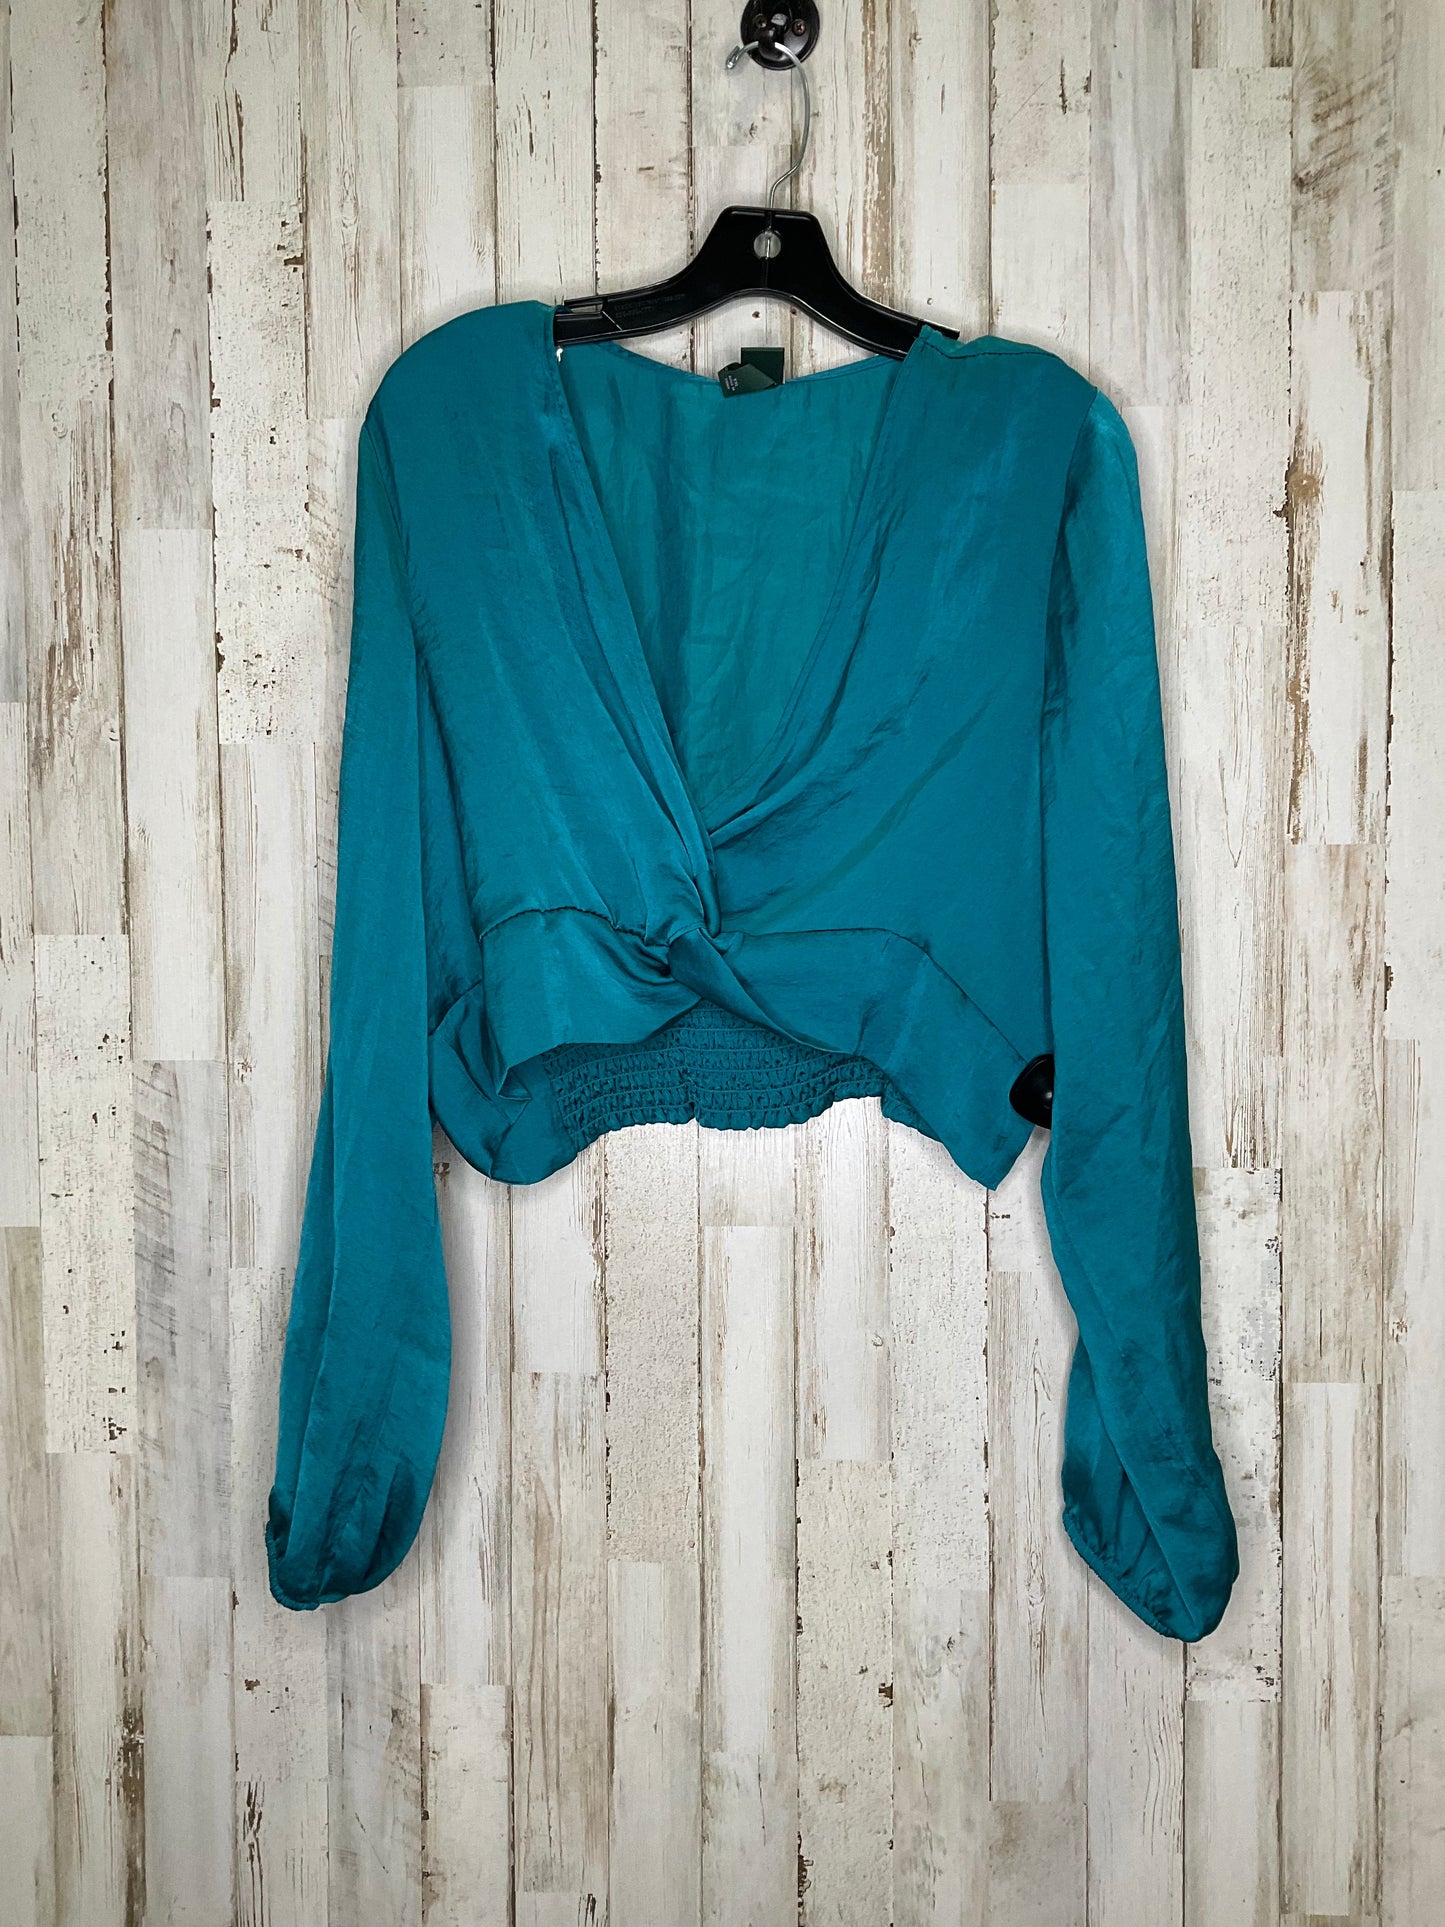 Top Long Sleeve By Wild Fable  Size: 1x